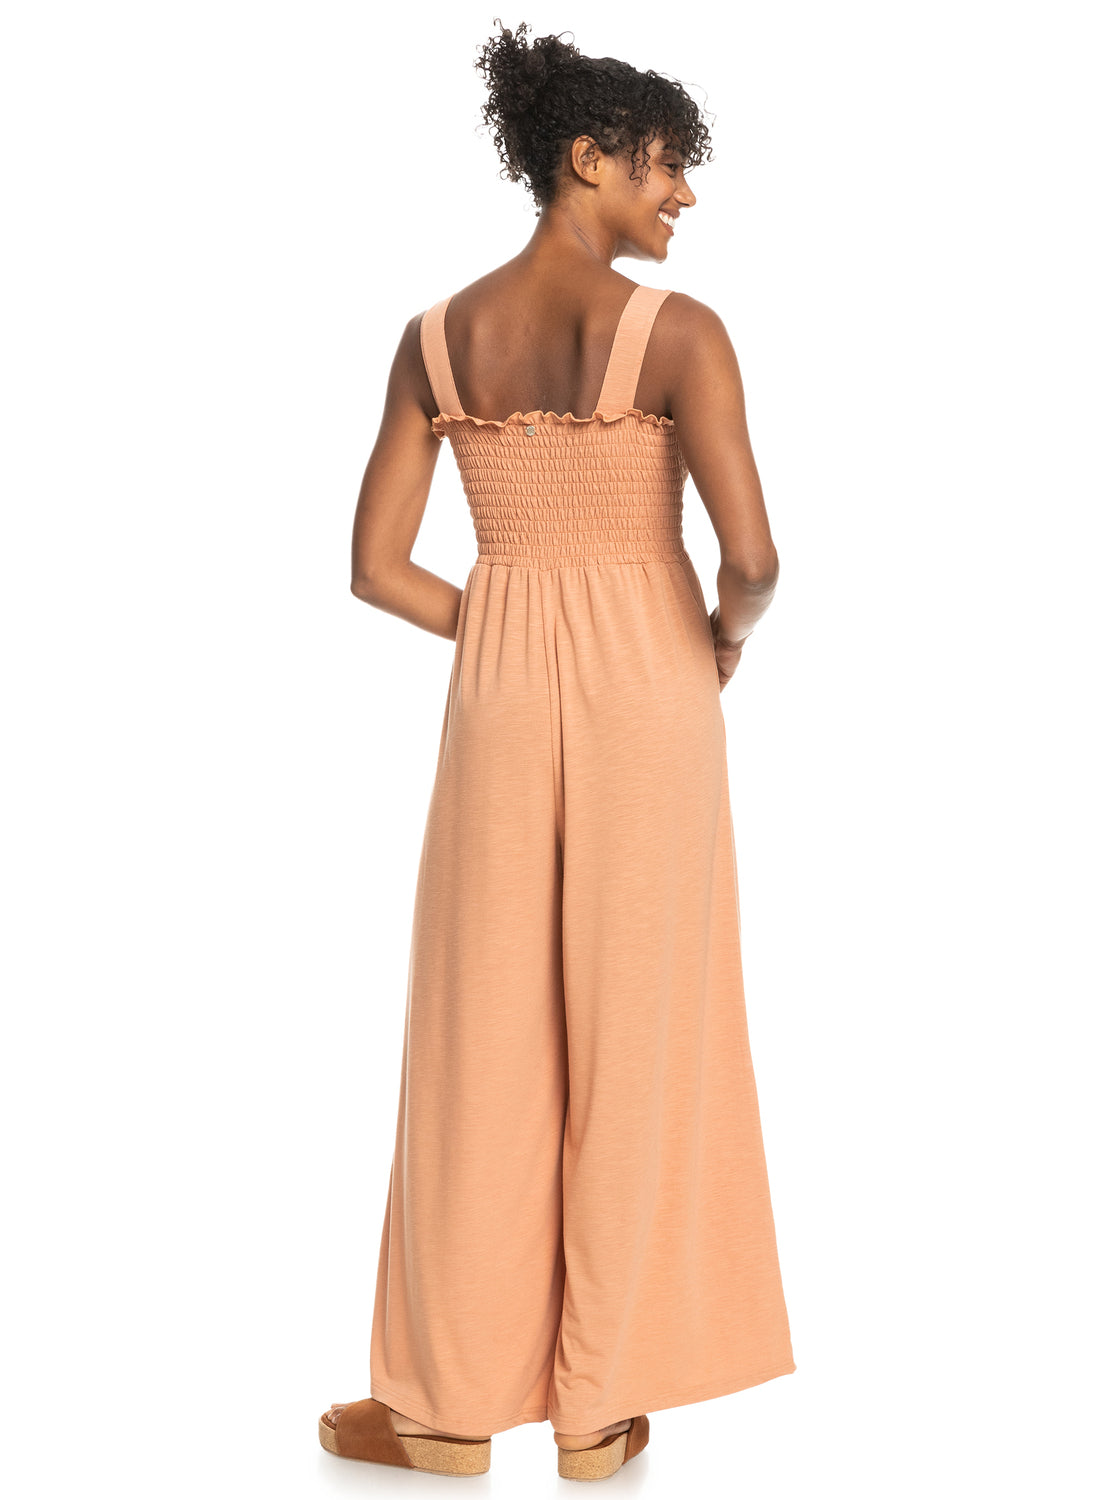 WOMENS JUST PASSING BY JUMPSUIT - ERJKD03419